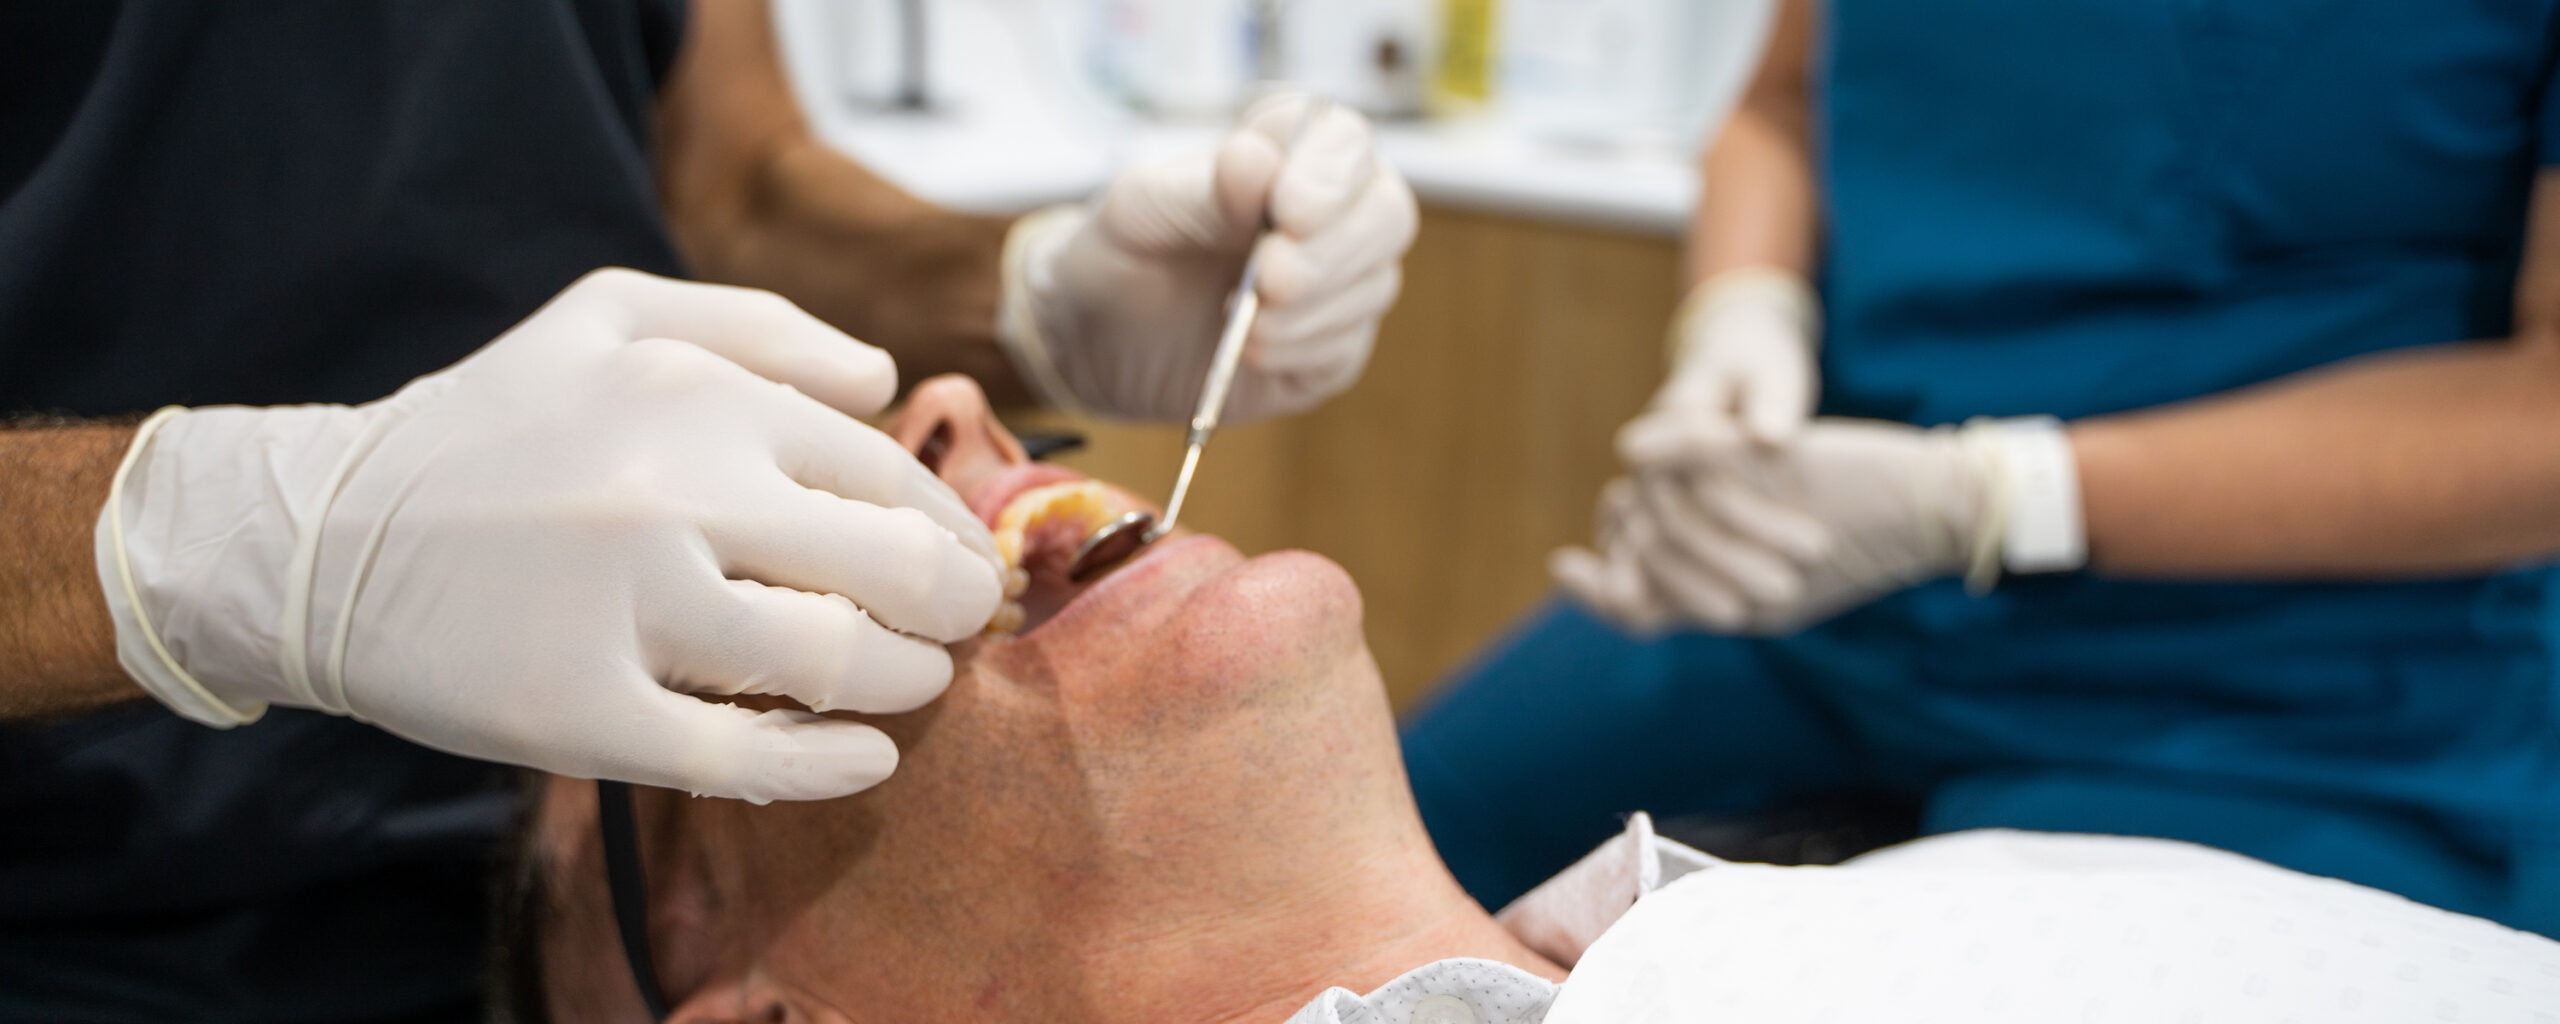 A close-up of a patient during a dental check-up appointment at White Dental Co.